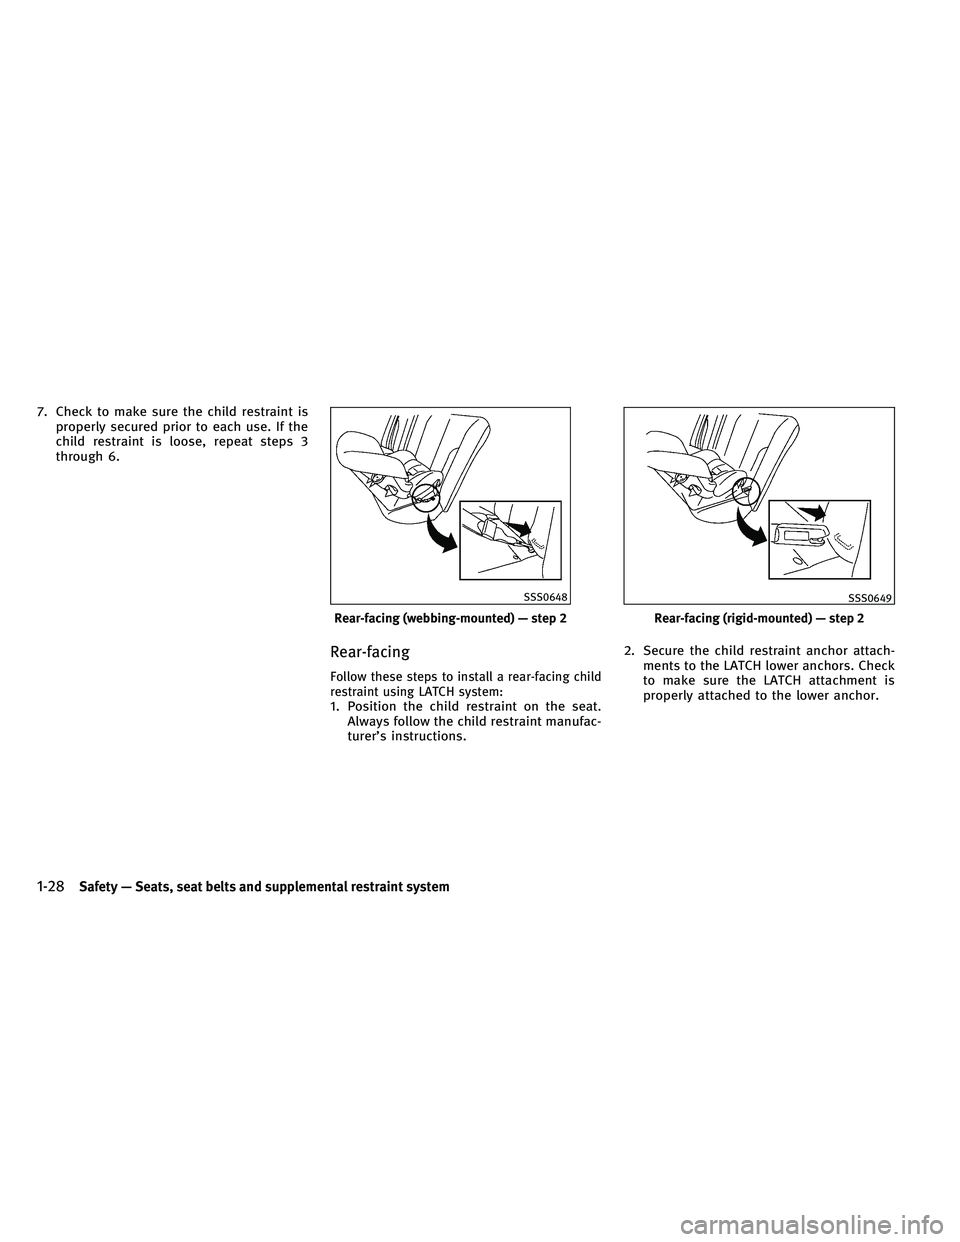 INFINITI G-COUPE 2011 Service Manual 7. Check to make sure the child restraint isproperly secured prior to each use. If the
child restraint is loose, repeat steps 3
through 6.
Rear-facing
Follow these steps to install a rear-facing child